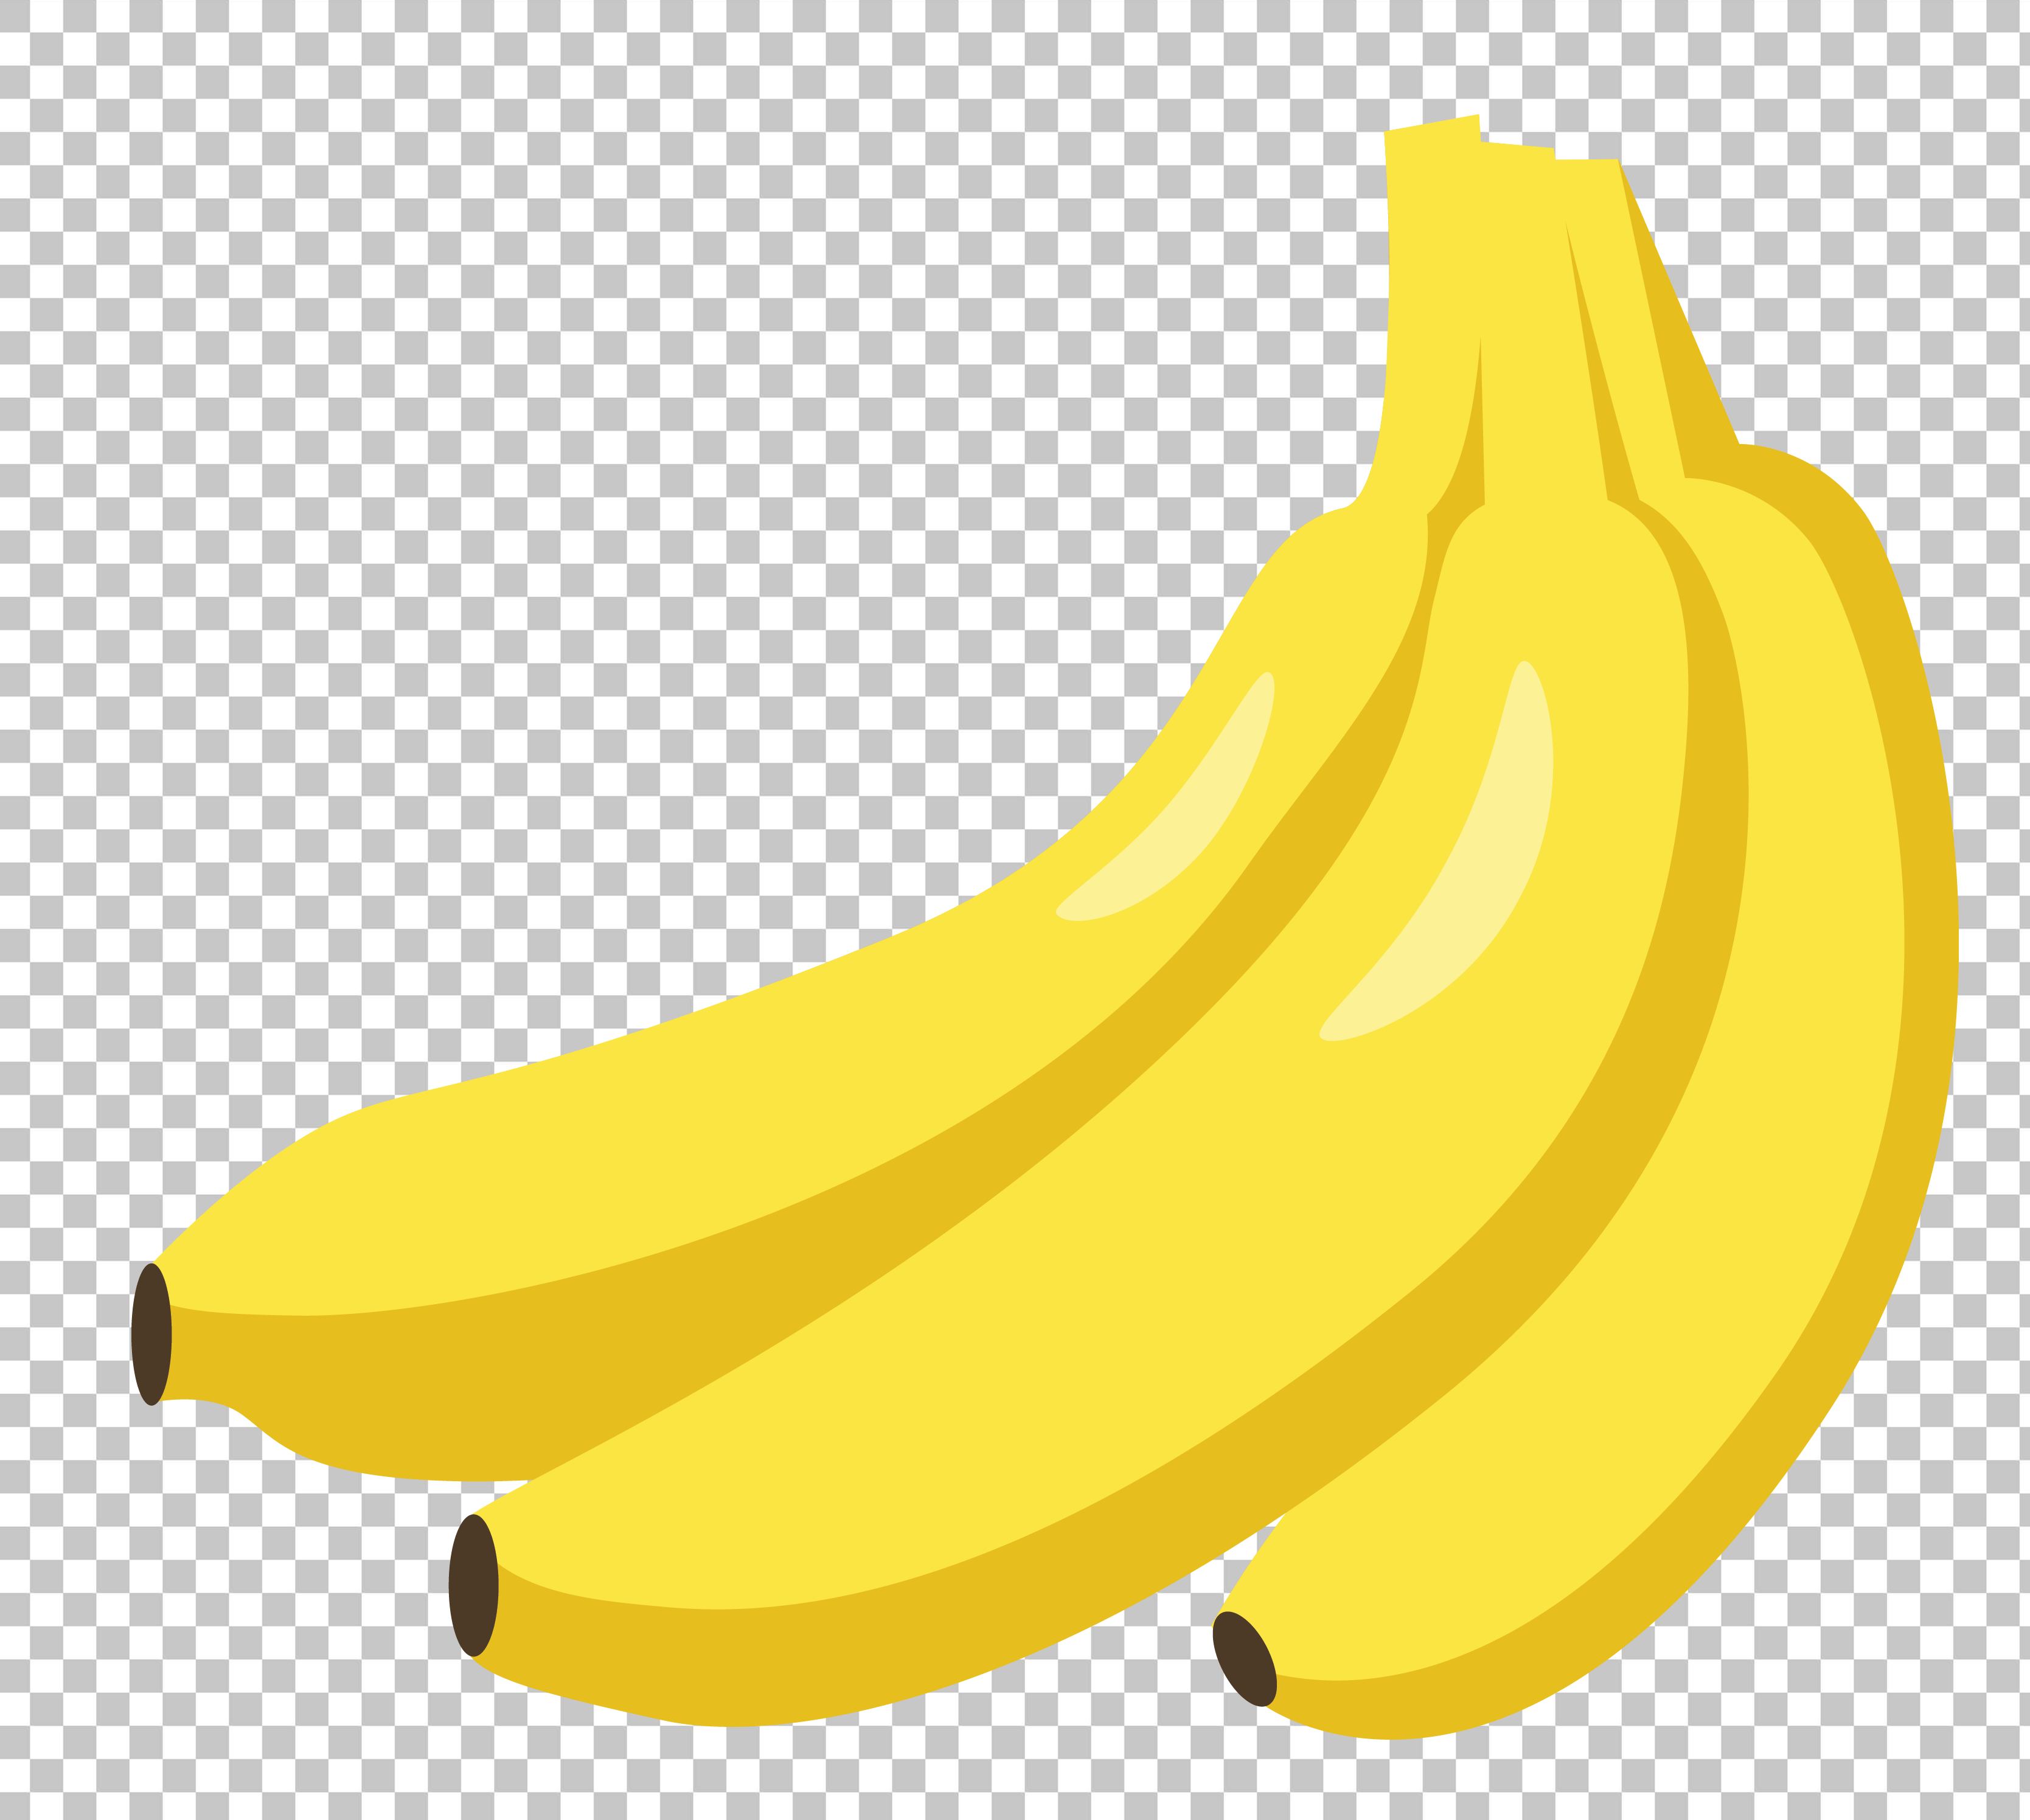 Bunch of Bananas on a Transparent Background